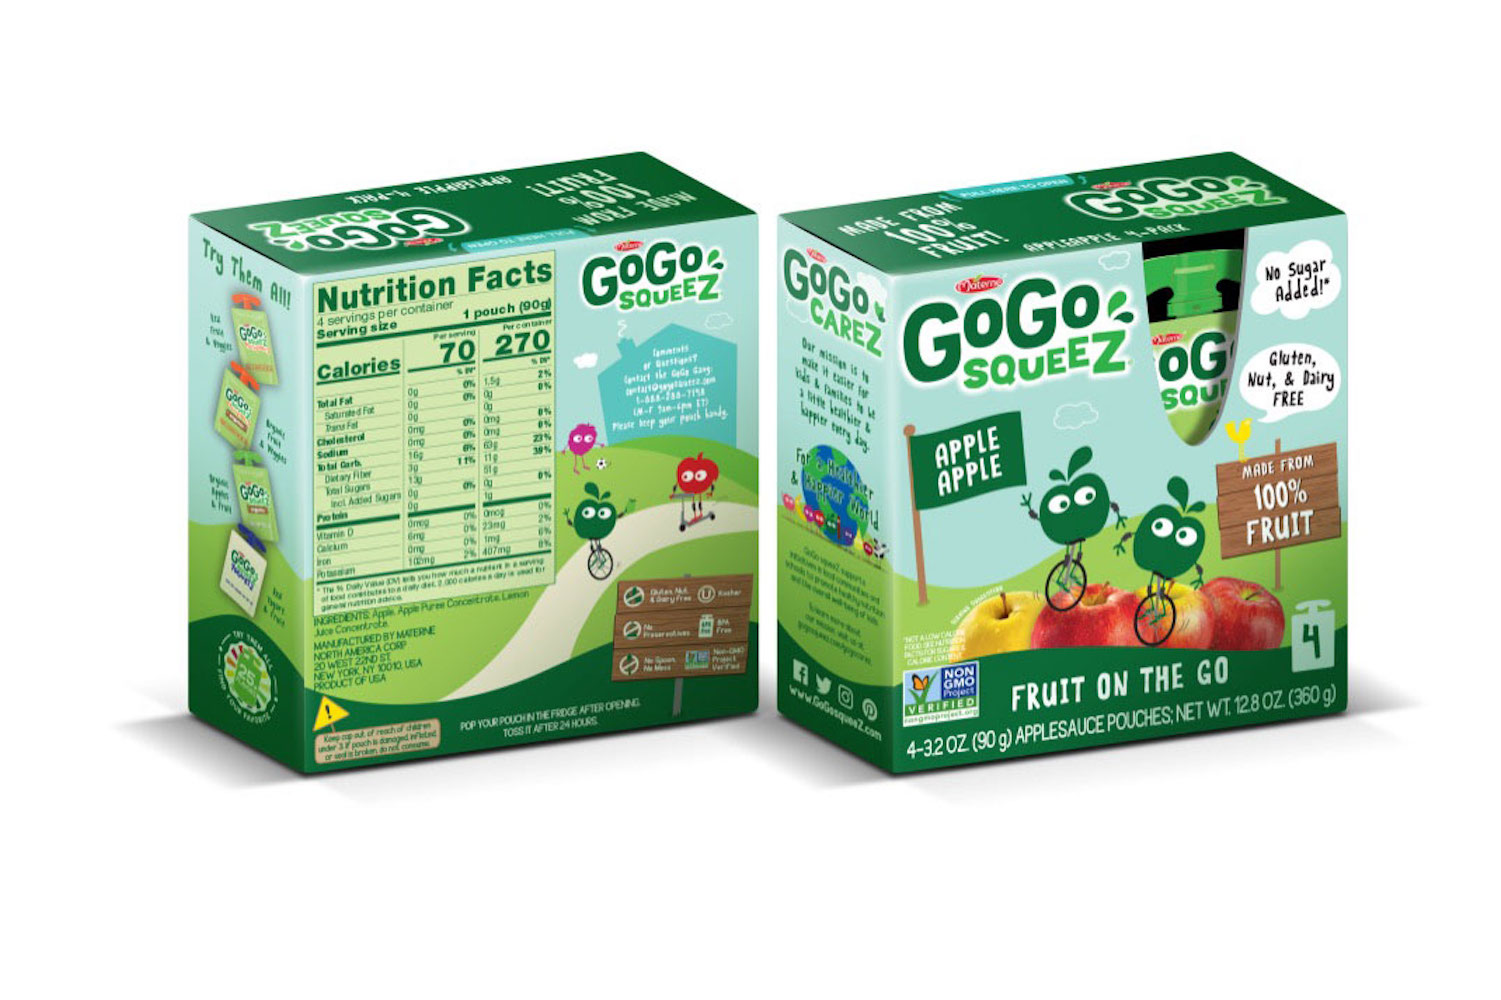 GoGo squeeZ x4 Conventional Flavors